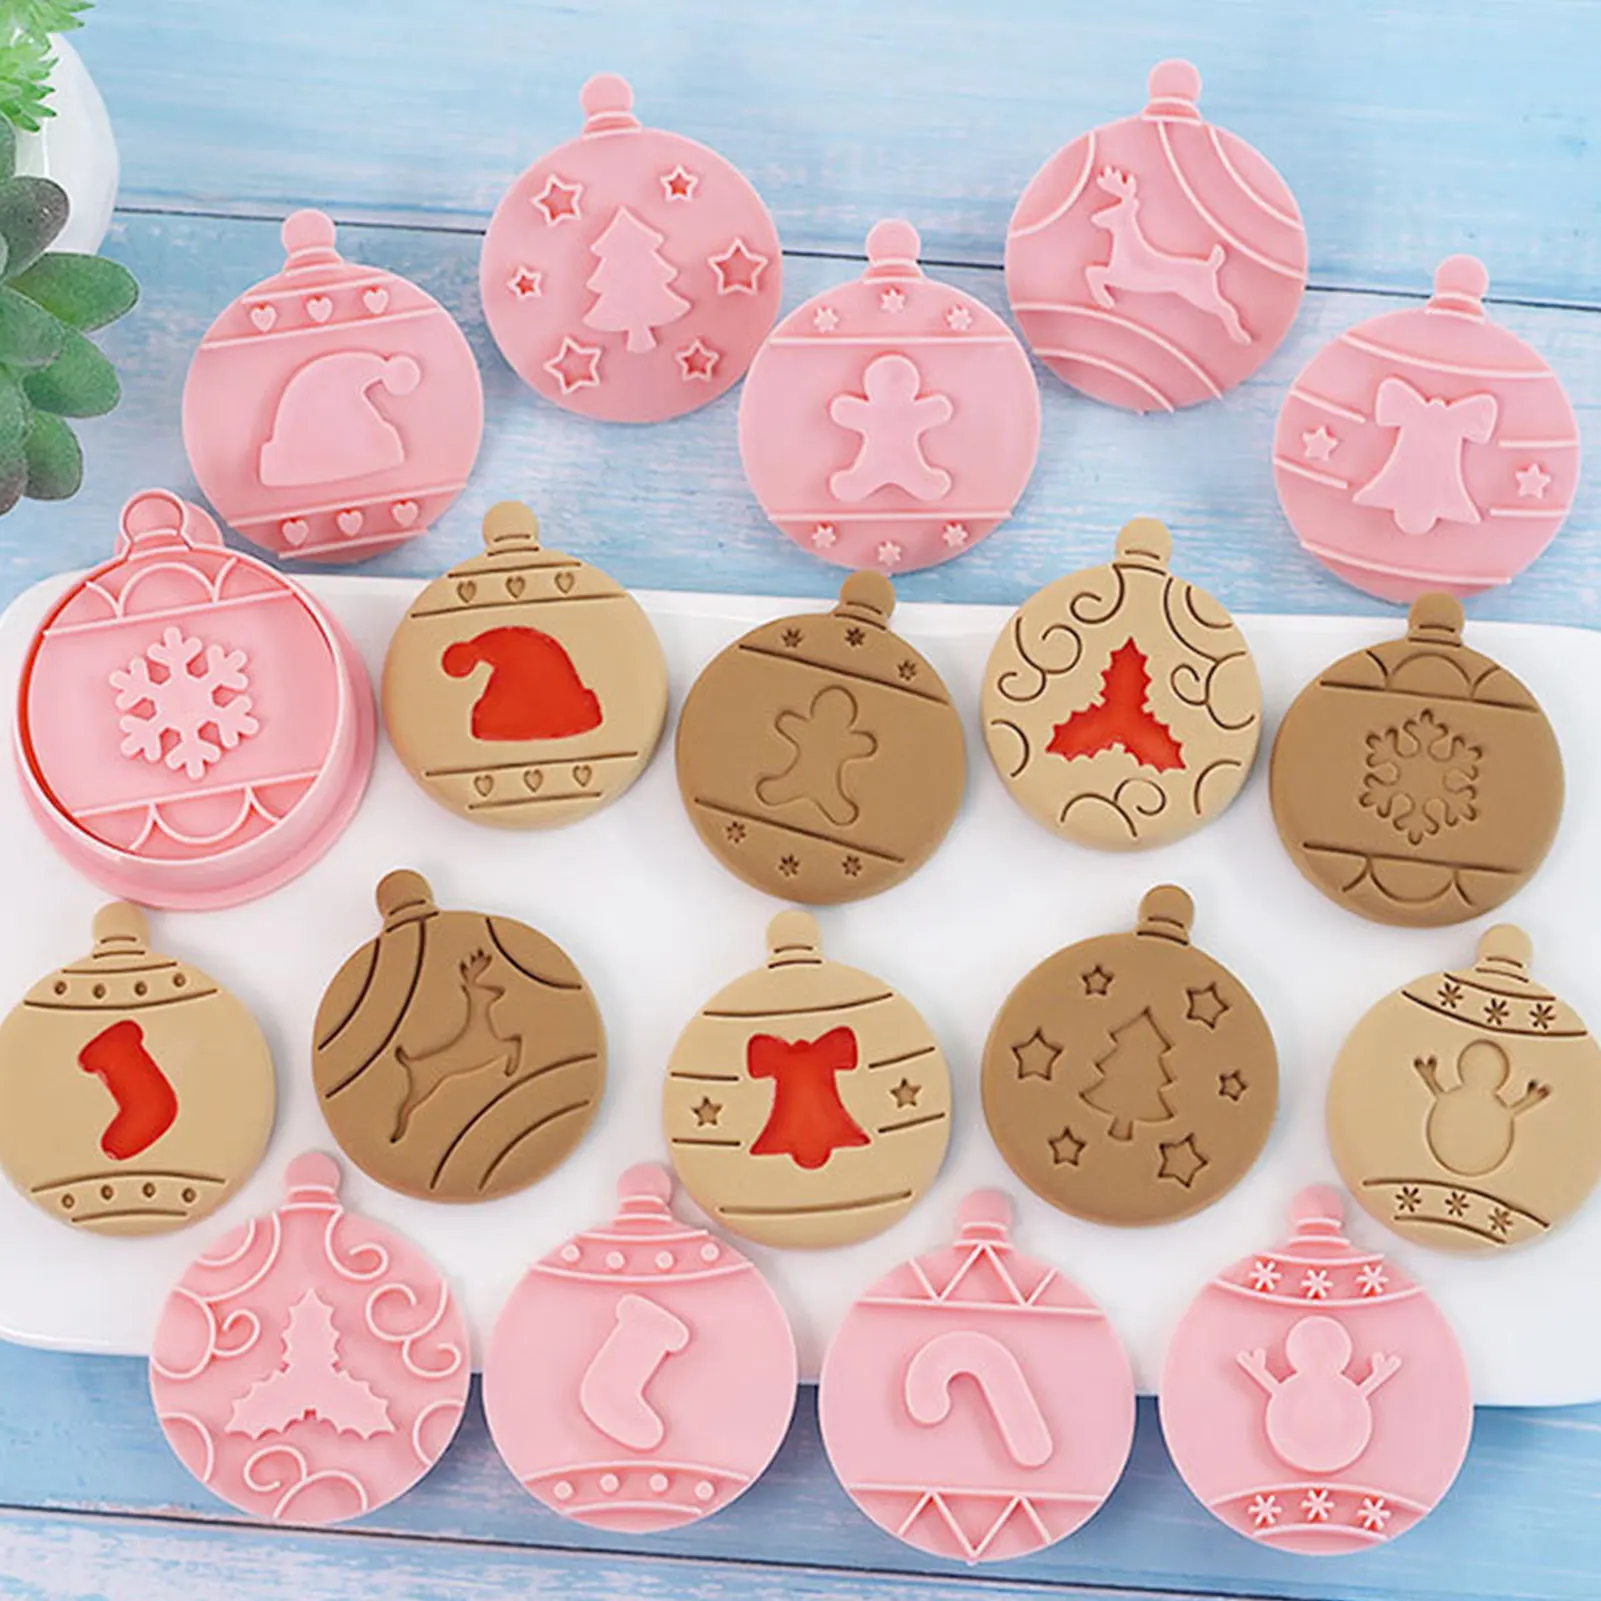 

10Pcs 3D Cookie Stampers Christmas Cookie Cutter For DIY Baking Biscuits Cake Decorations Fondant Soft Clay Chocolate Molds